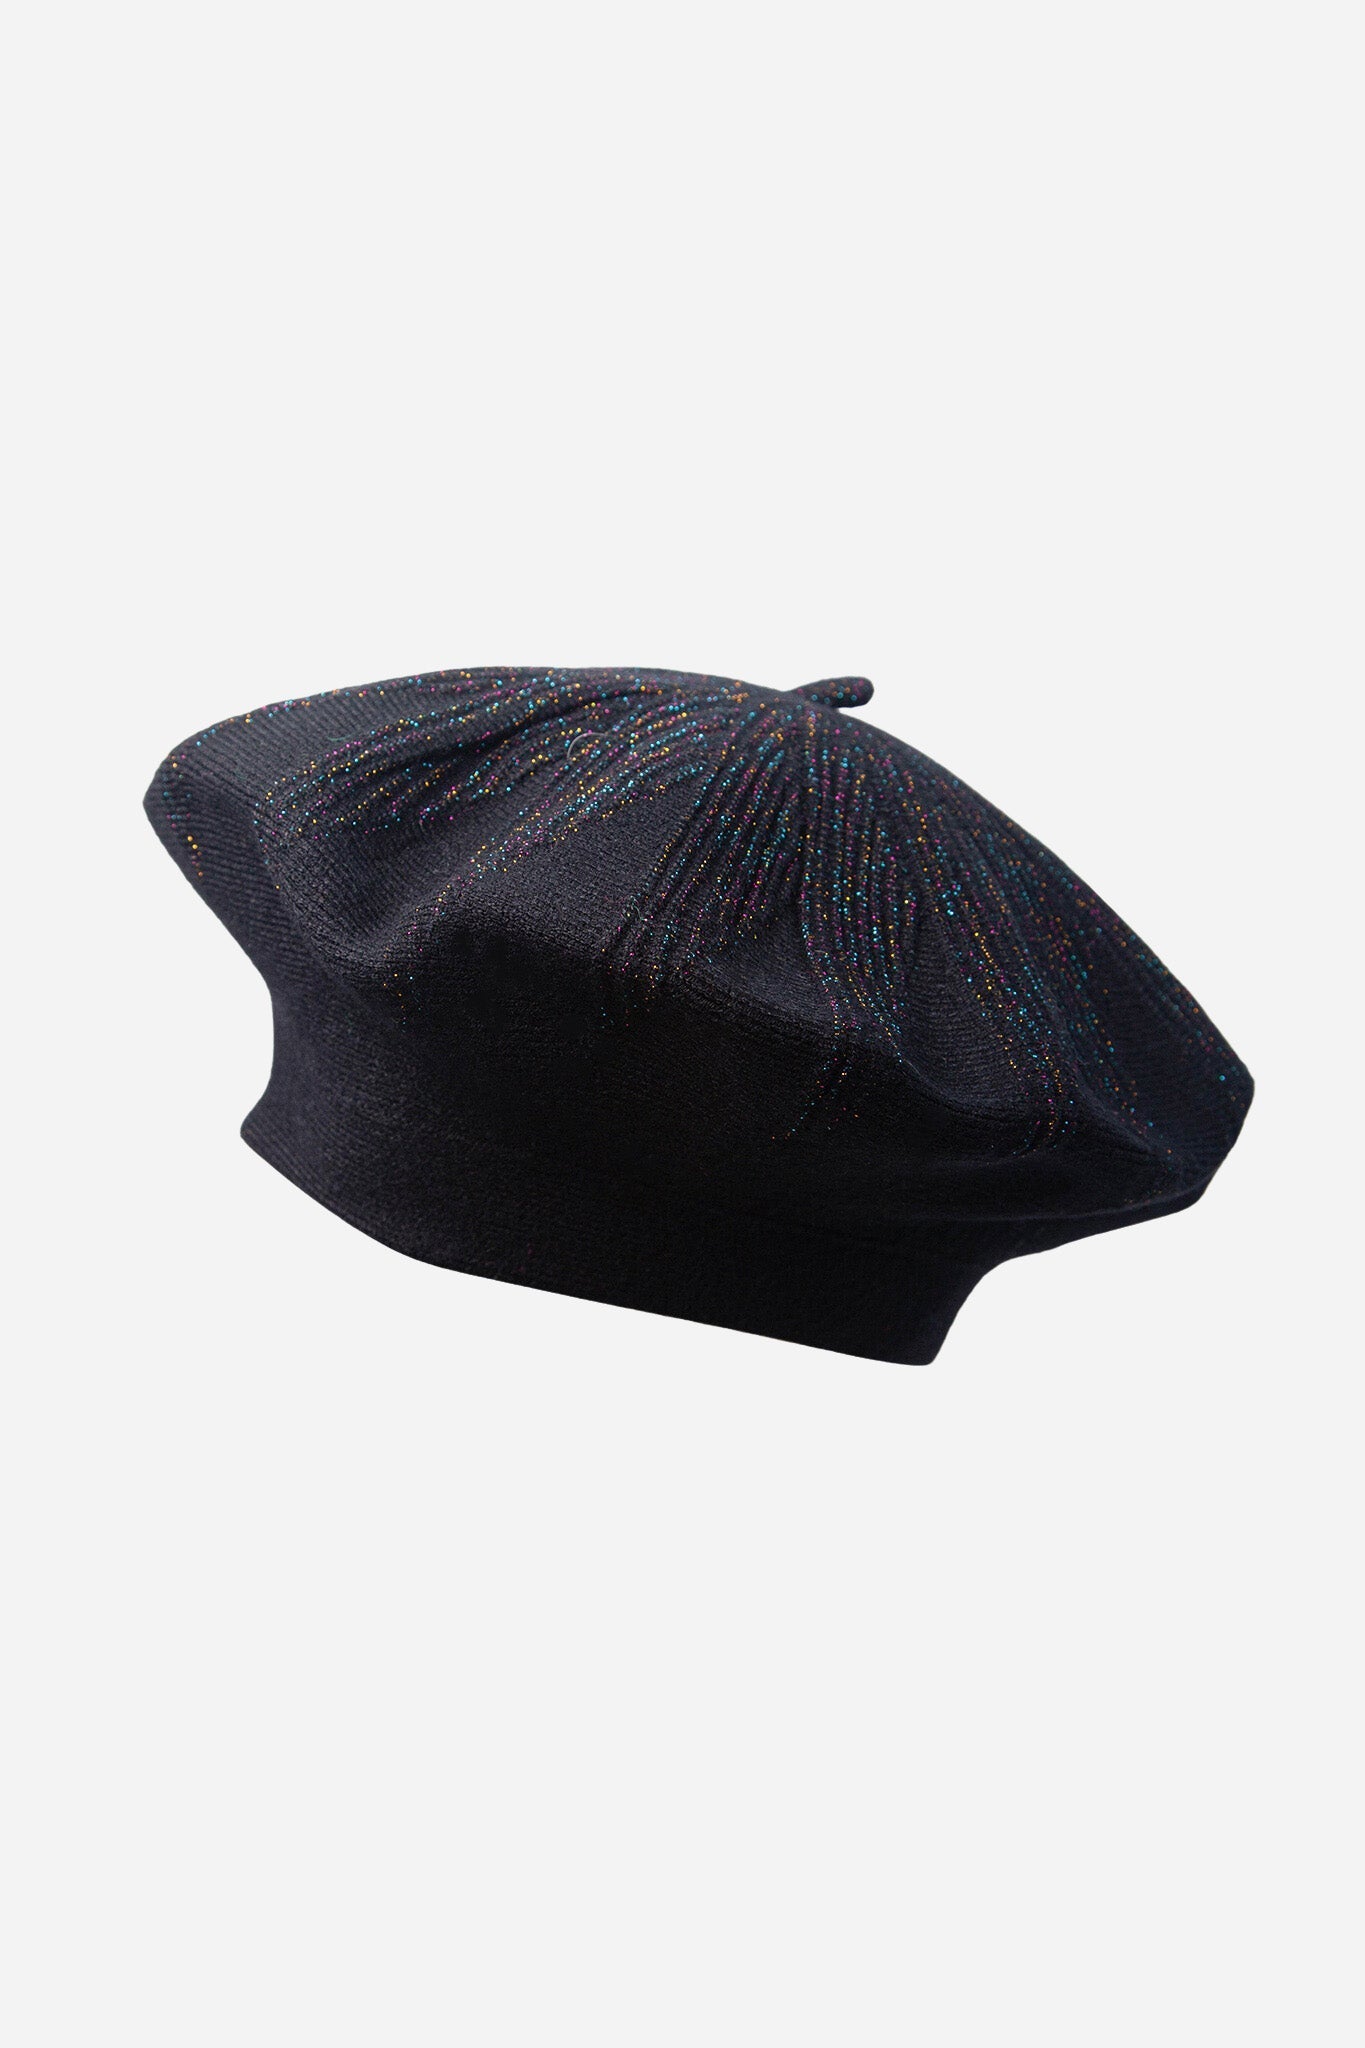 black beret with an all over rainbow glitter shimmer